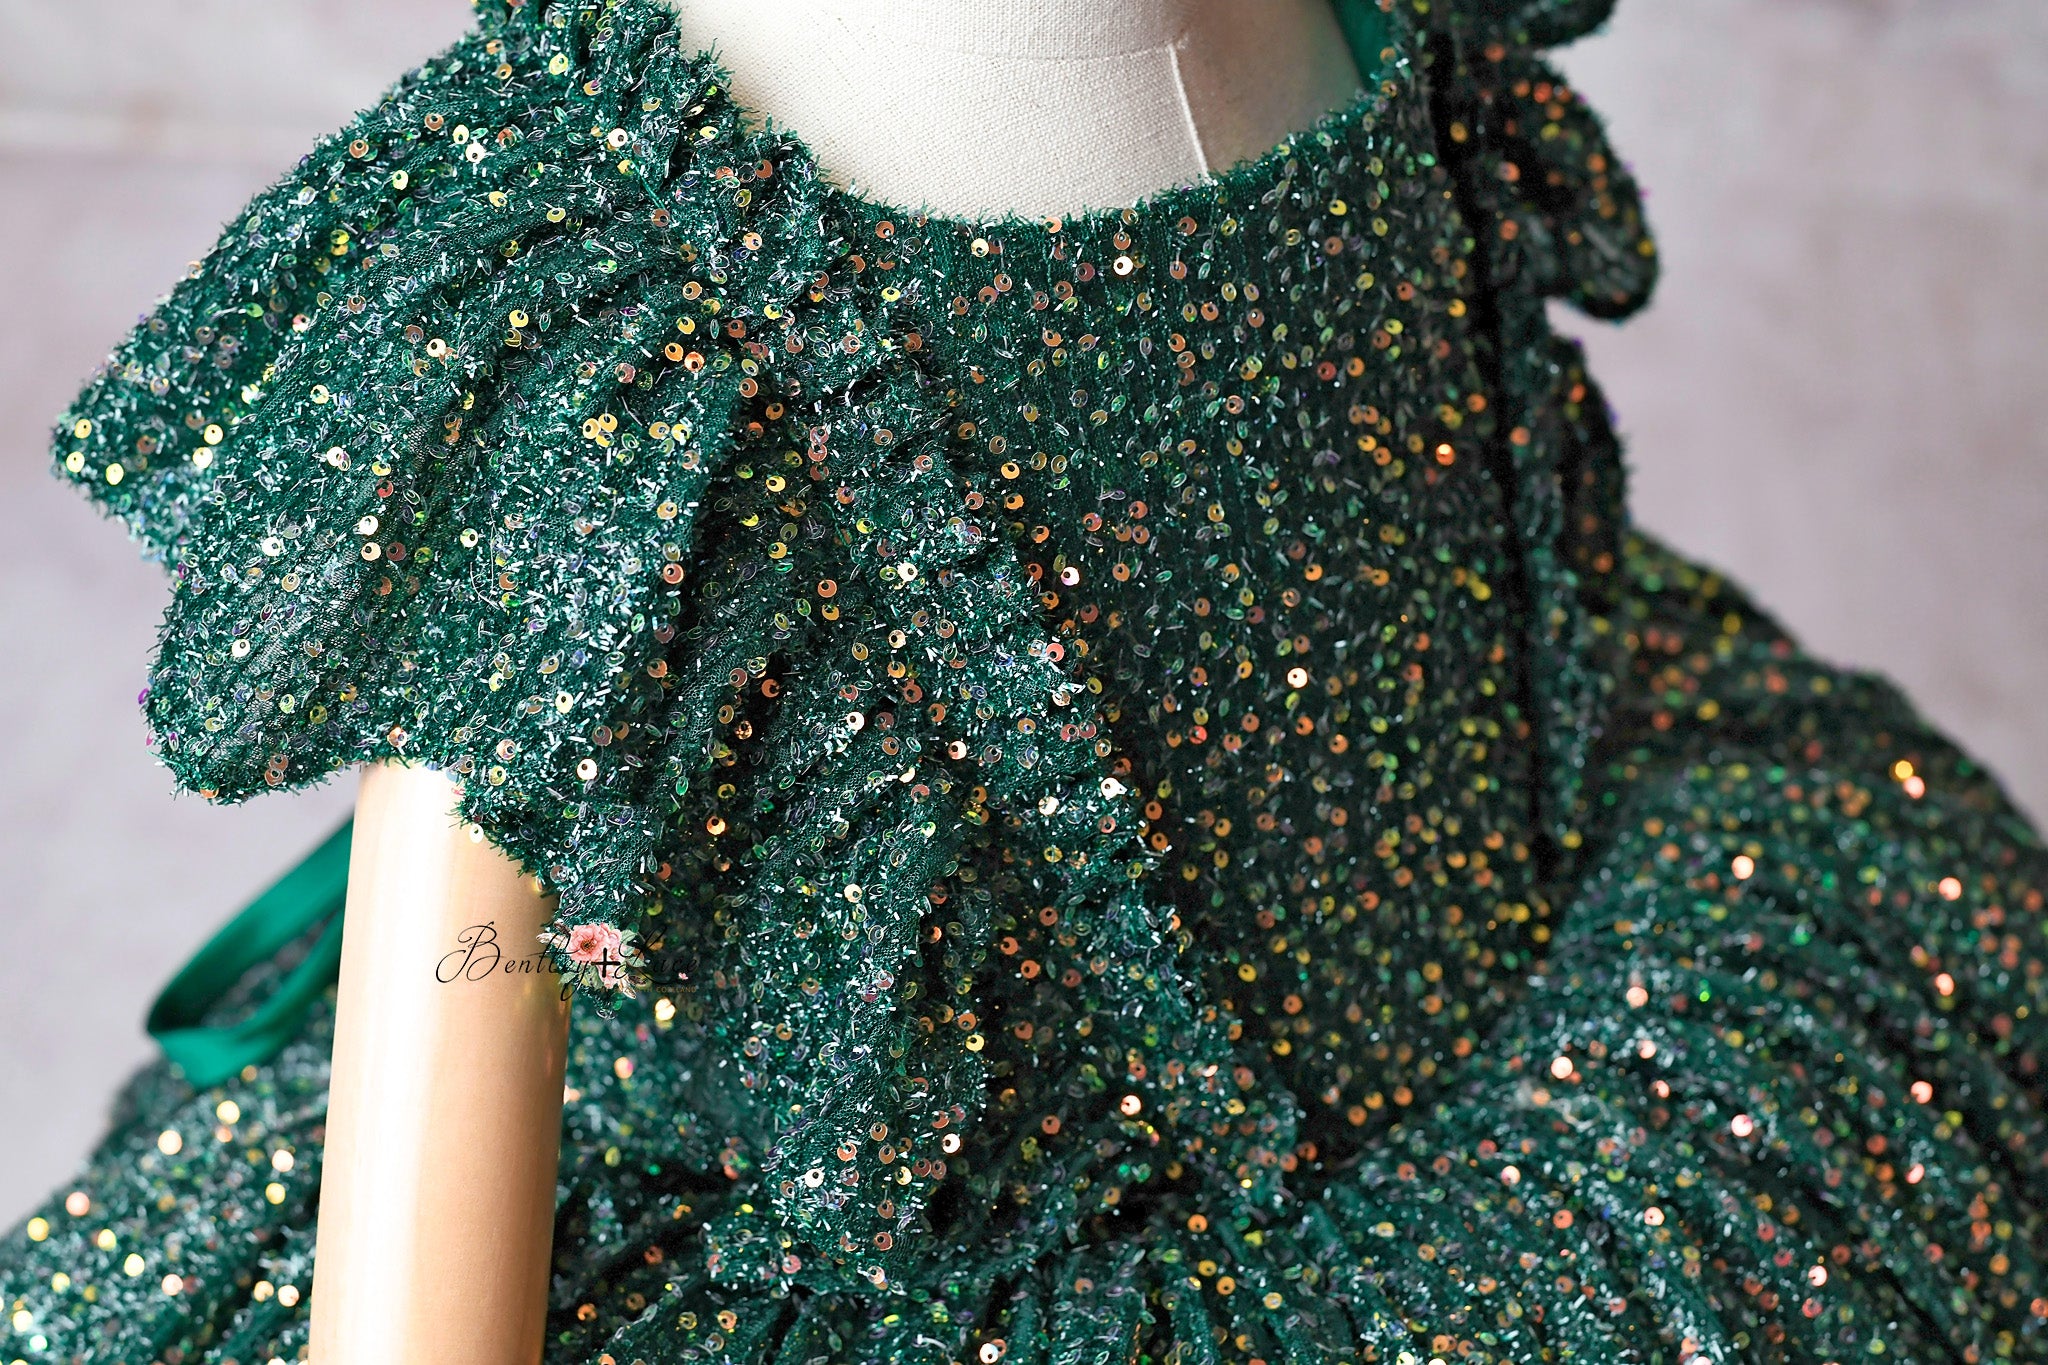 Couture holiday rental gown: "Holly" -  petal length ( 6 Year - Petite 7 Year up to petite 8)